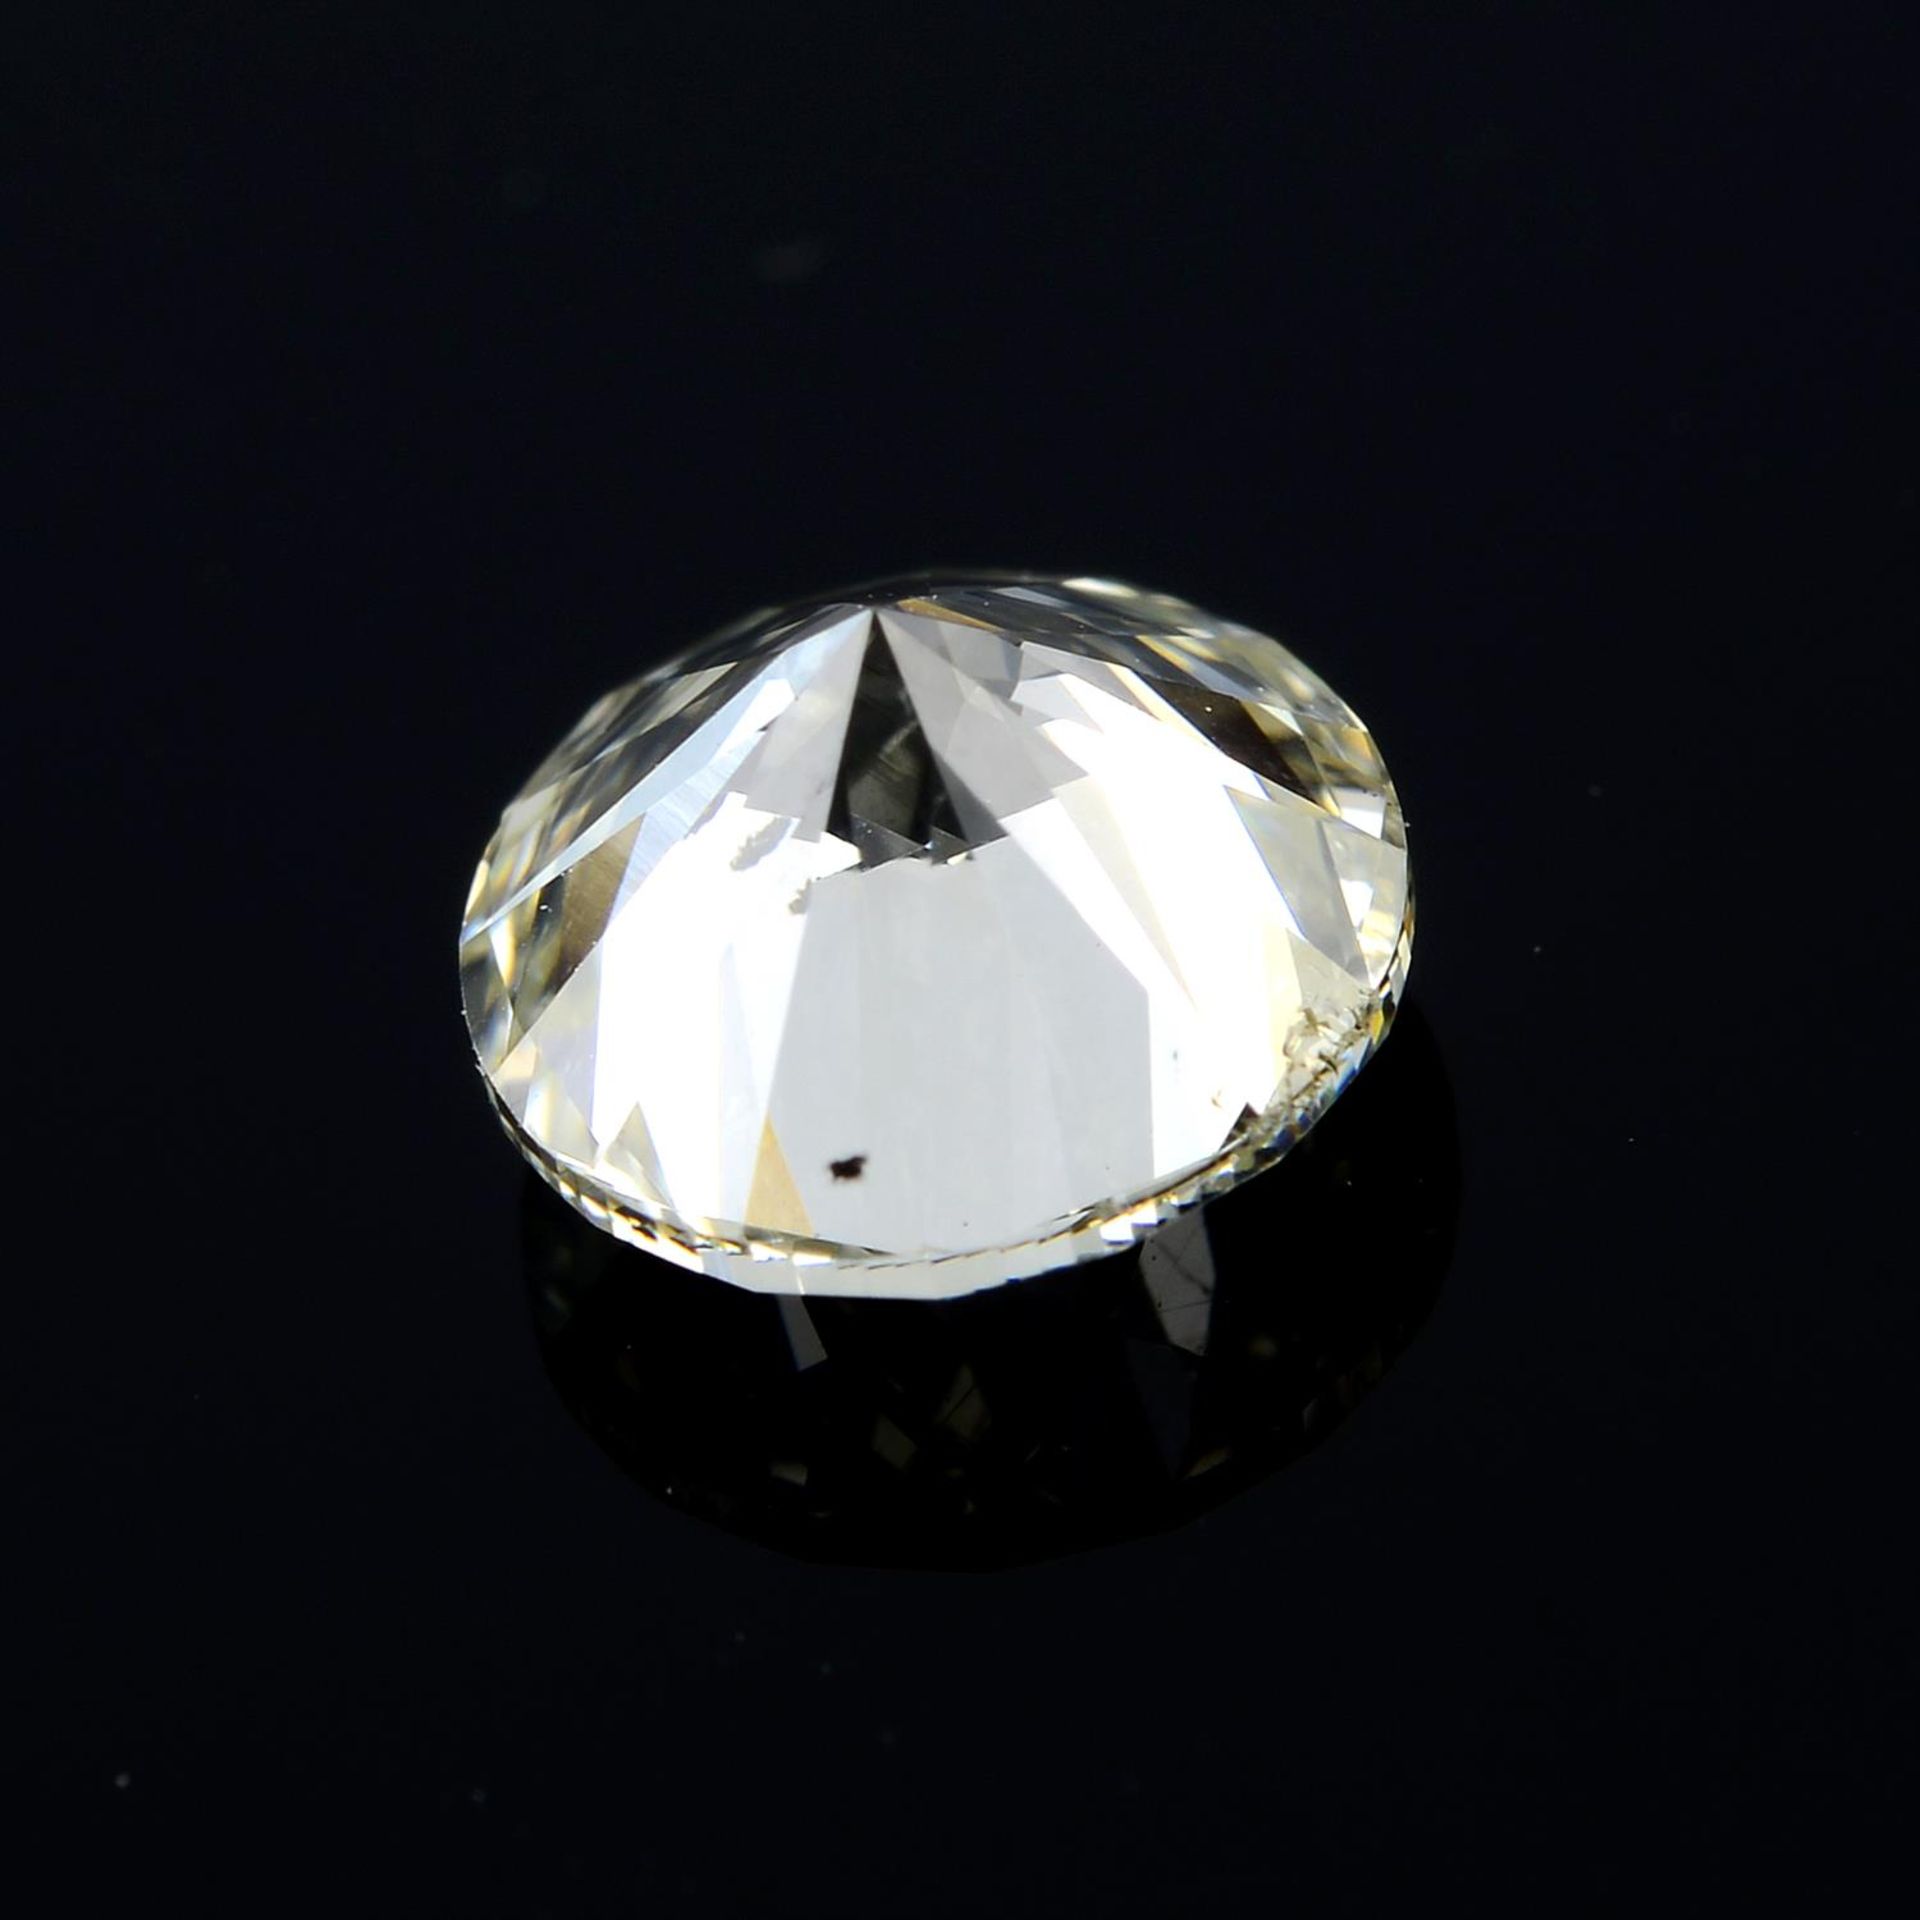 A round brilliant-cut diamond, weight 1.03cts. - Image 2 of 2